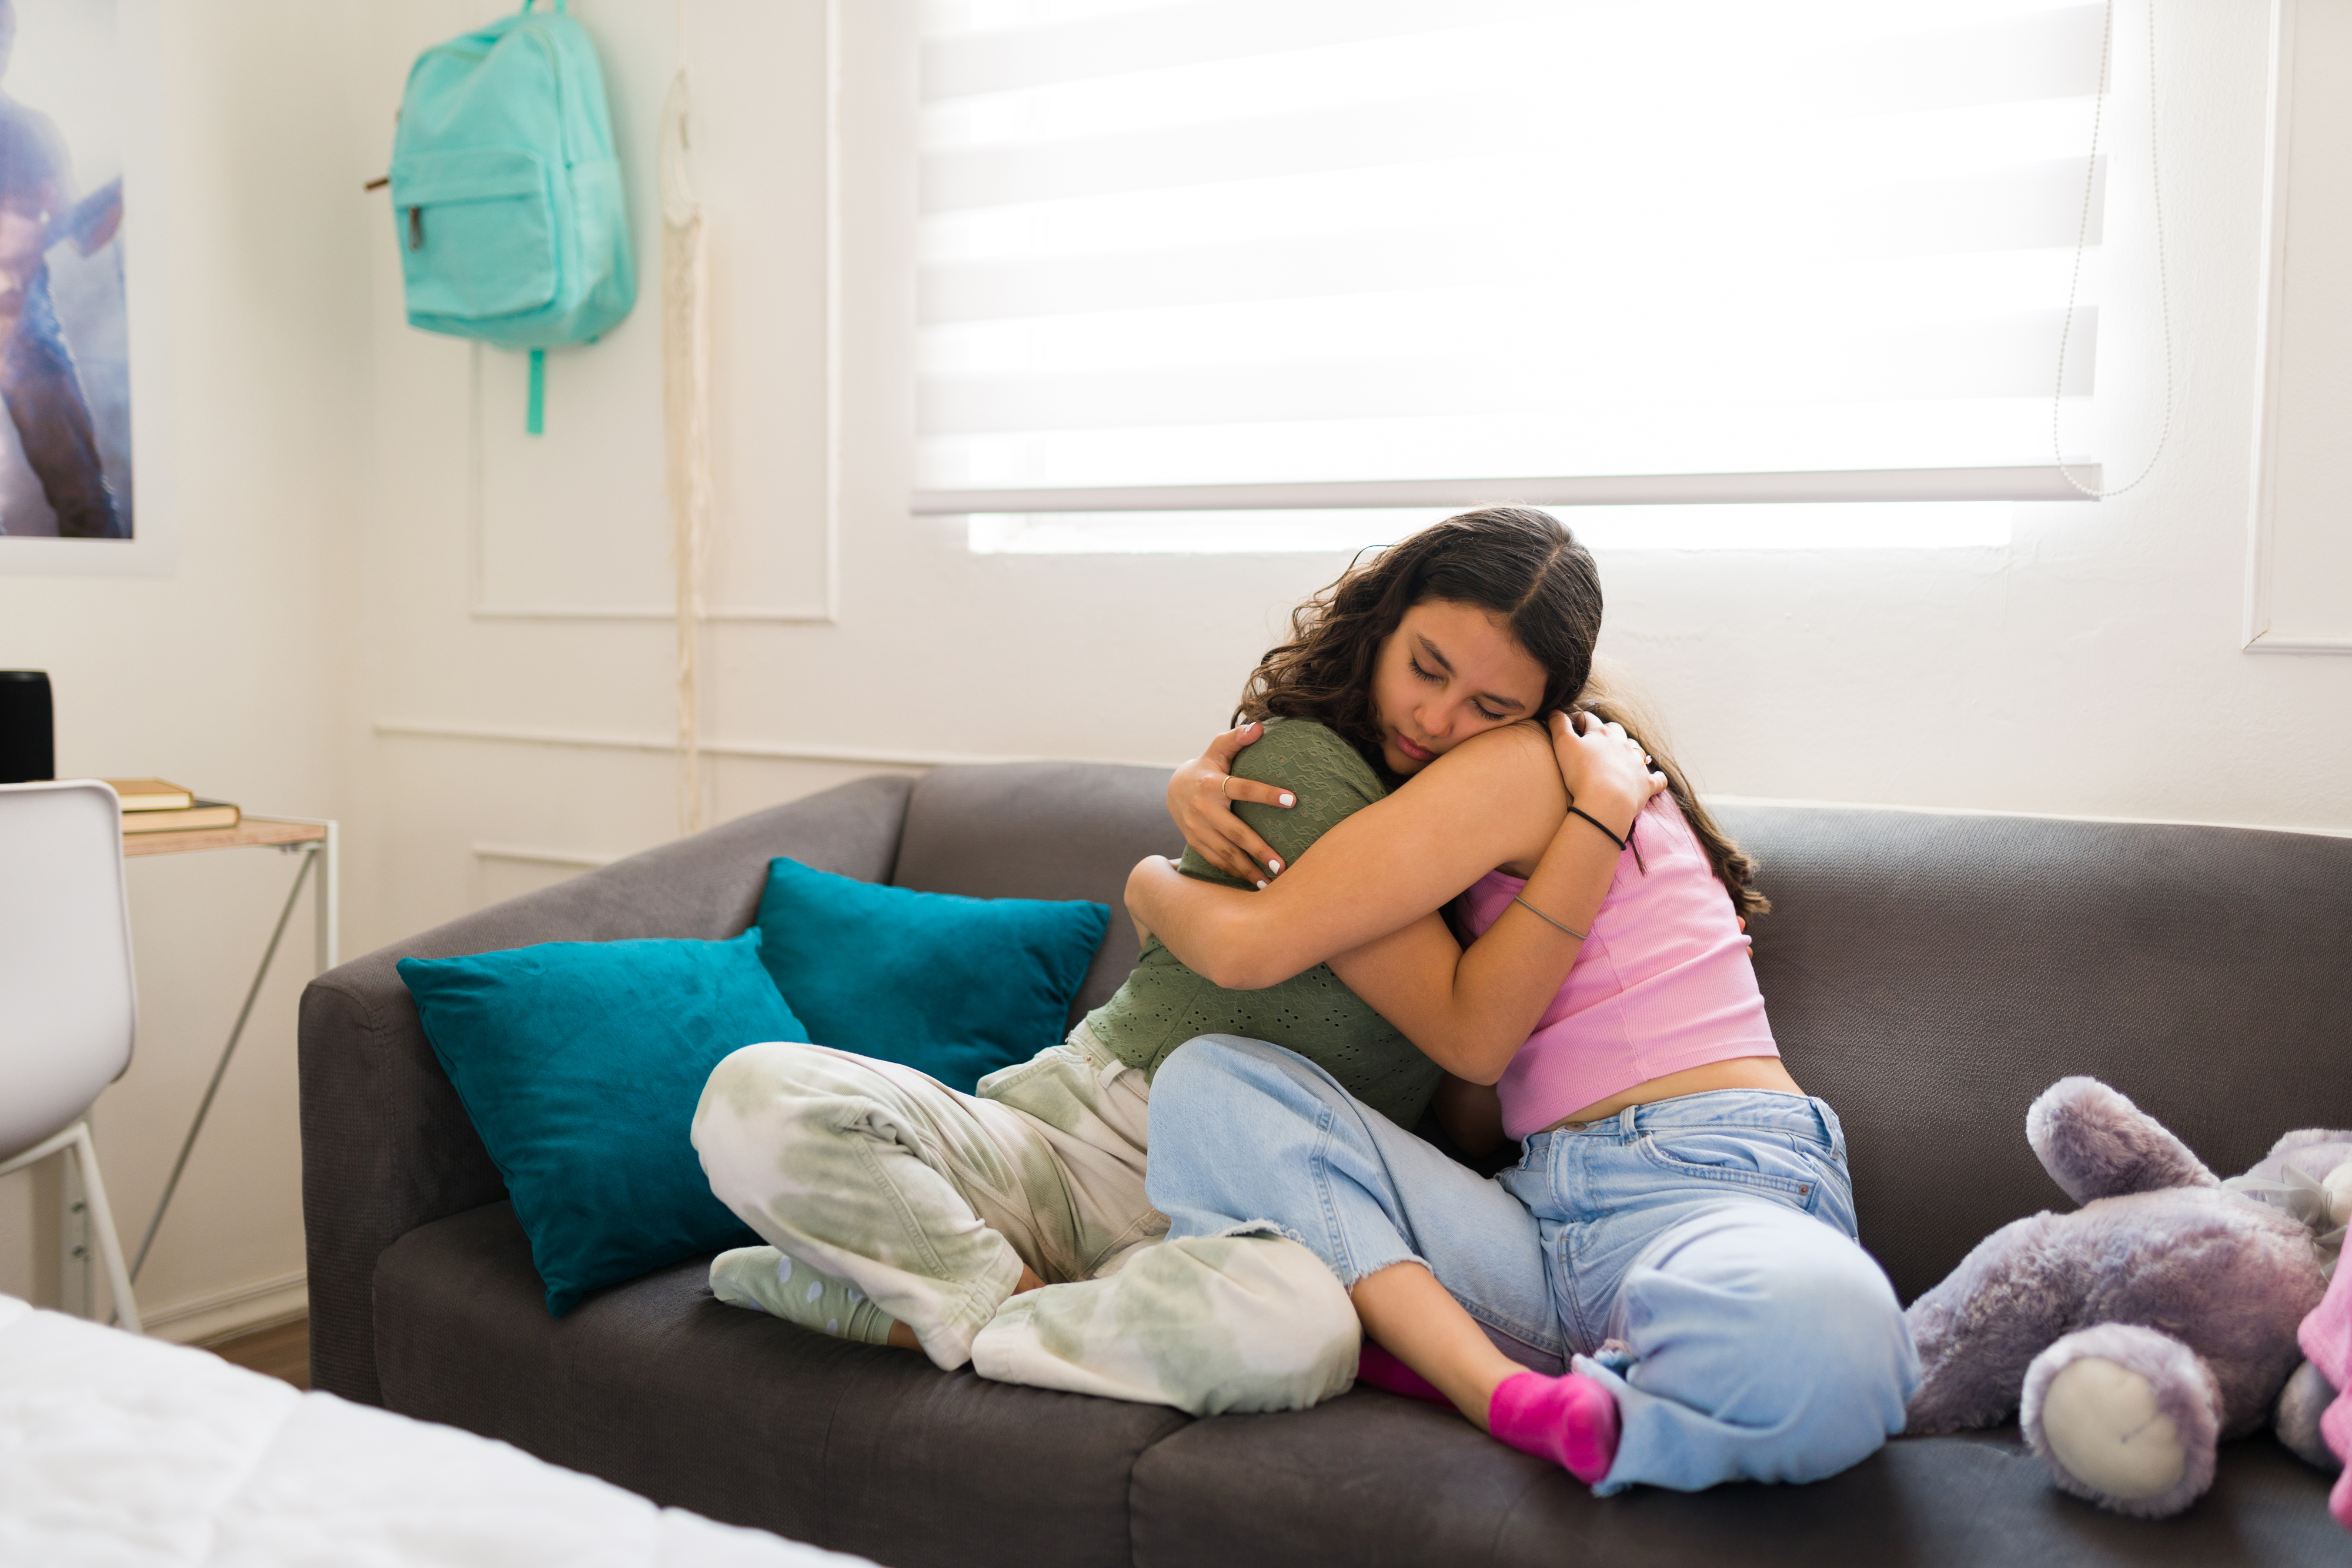 Two dark-haired teen girls hugging on a couch